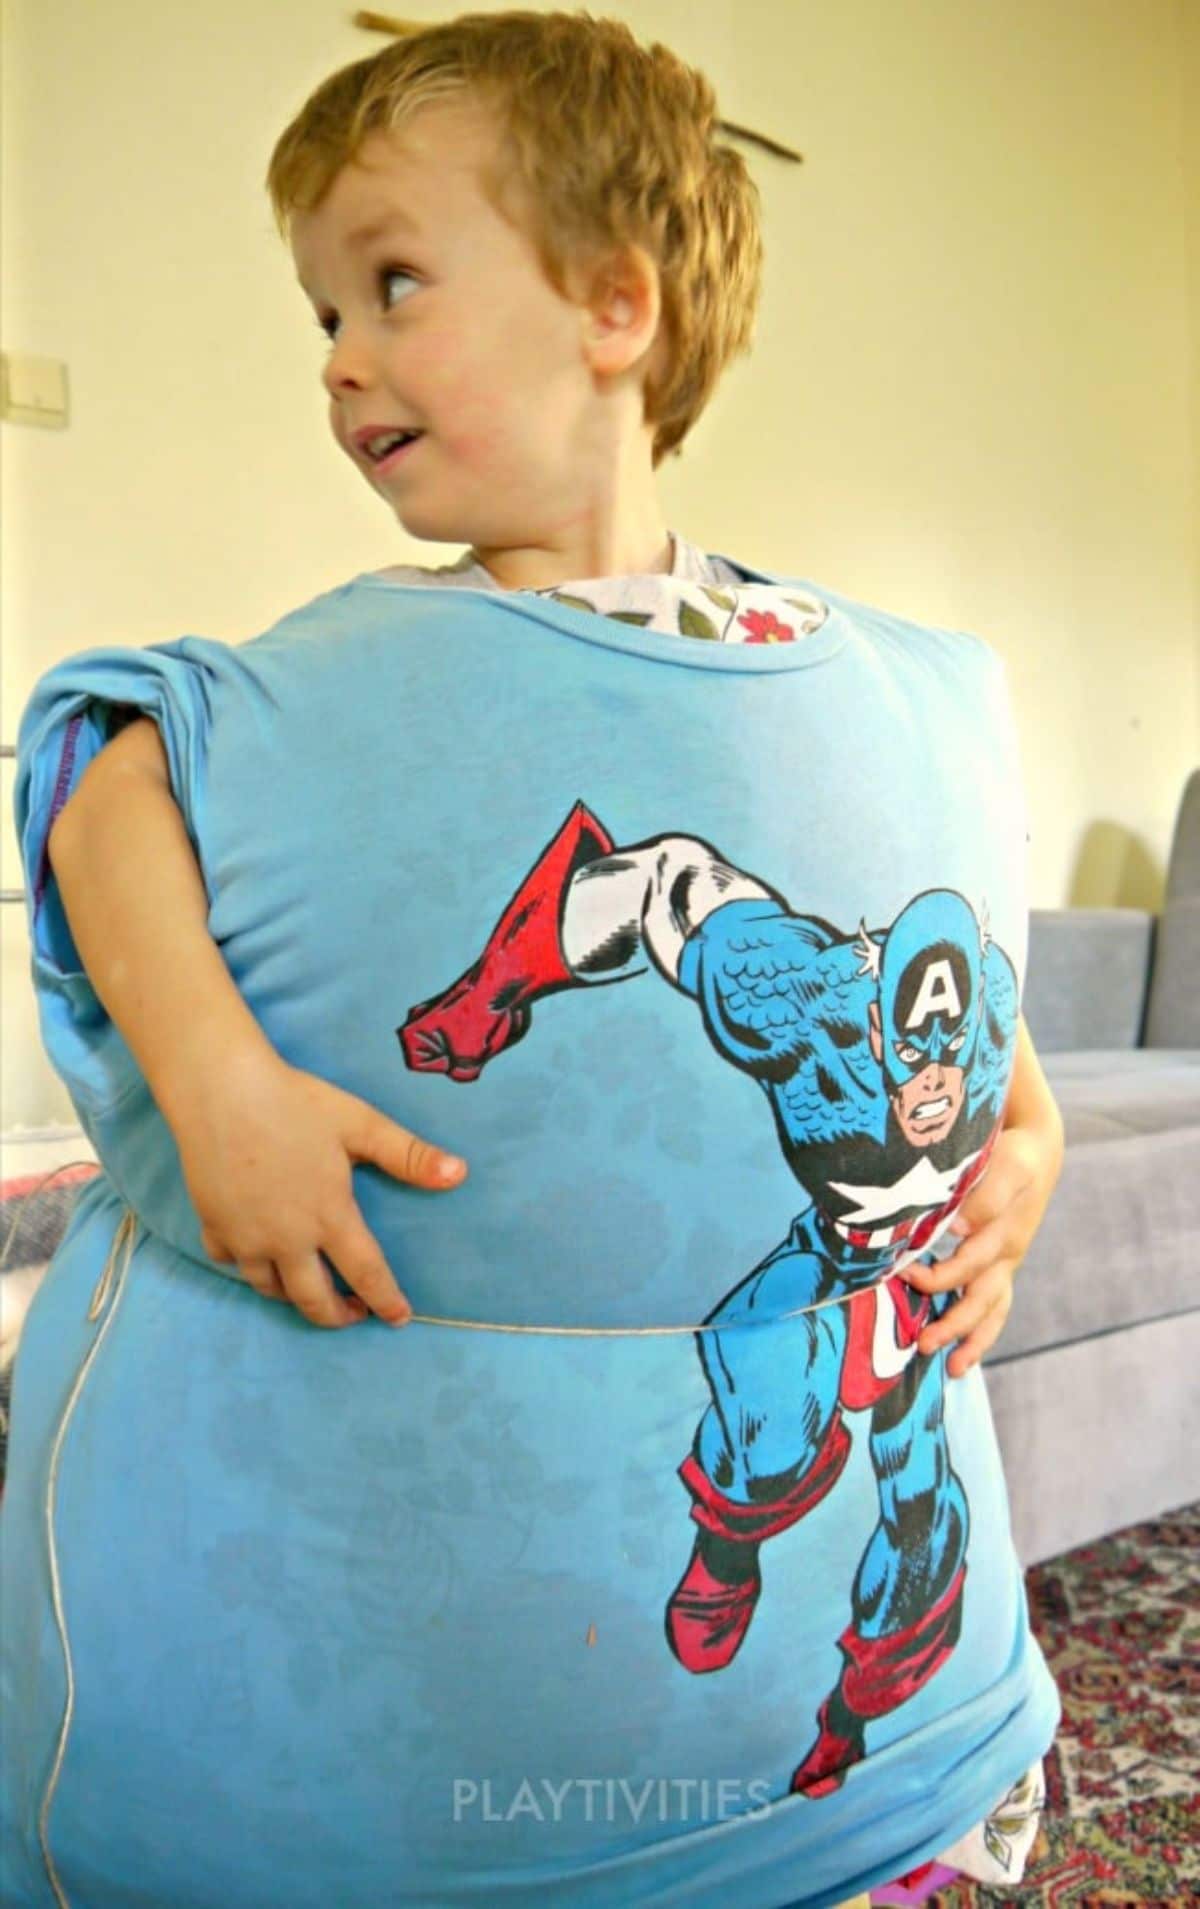 a boy looks ot the left of the screen. He is wearing a blue captain america shirt stuffed with pillows